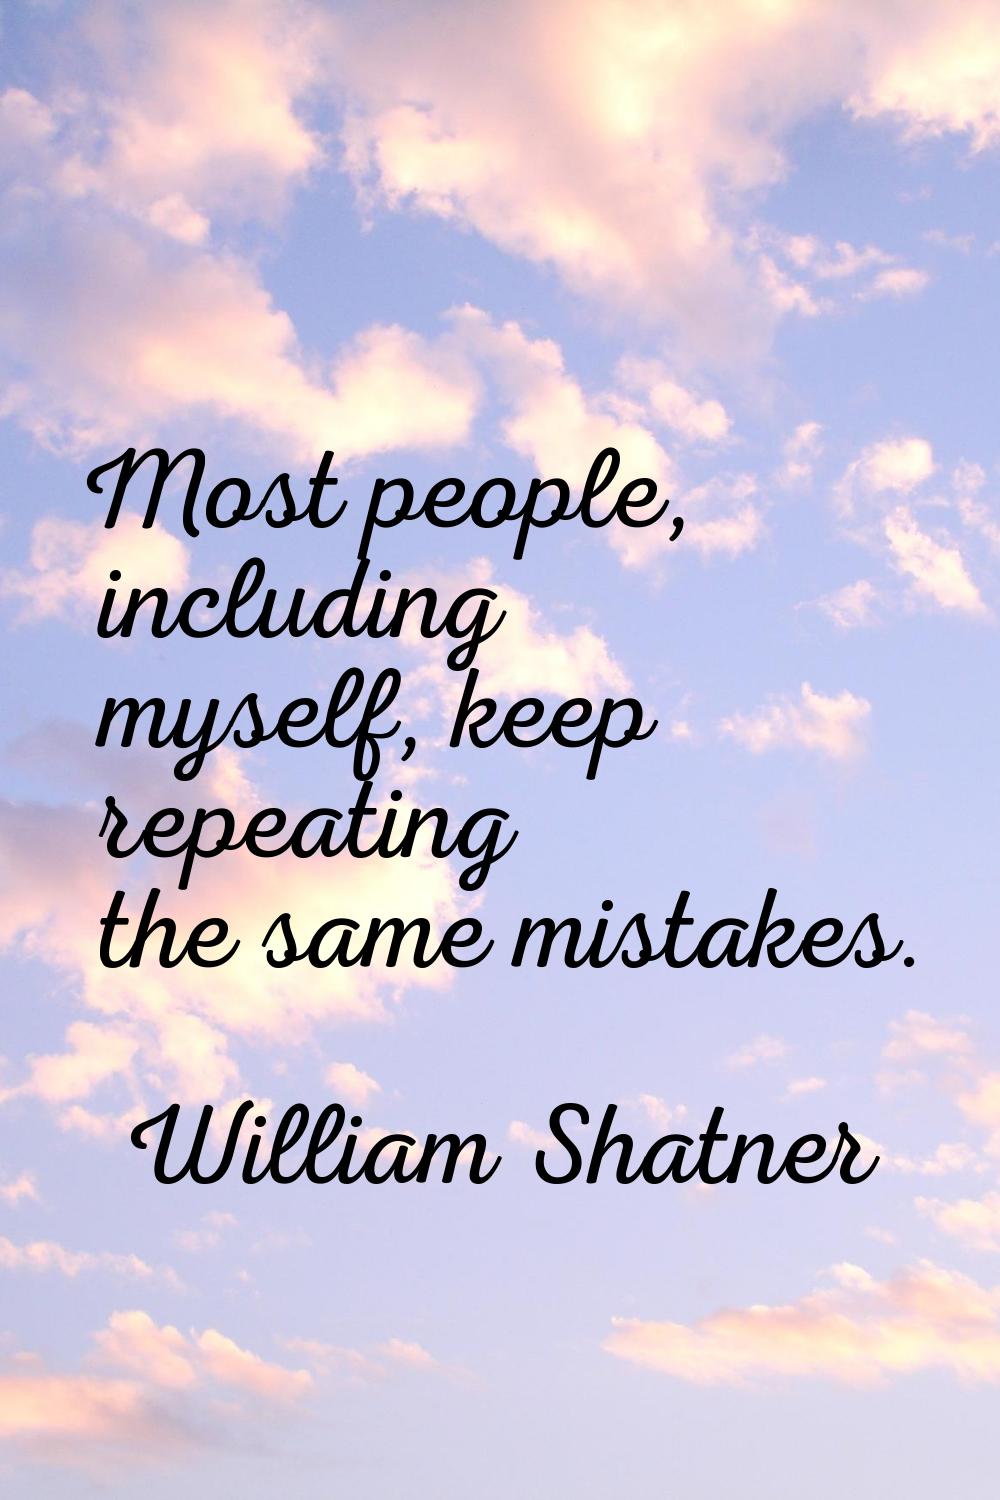 Most people, including myself, keep repeating the same mistakes.